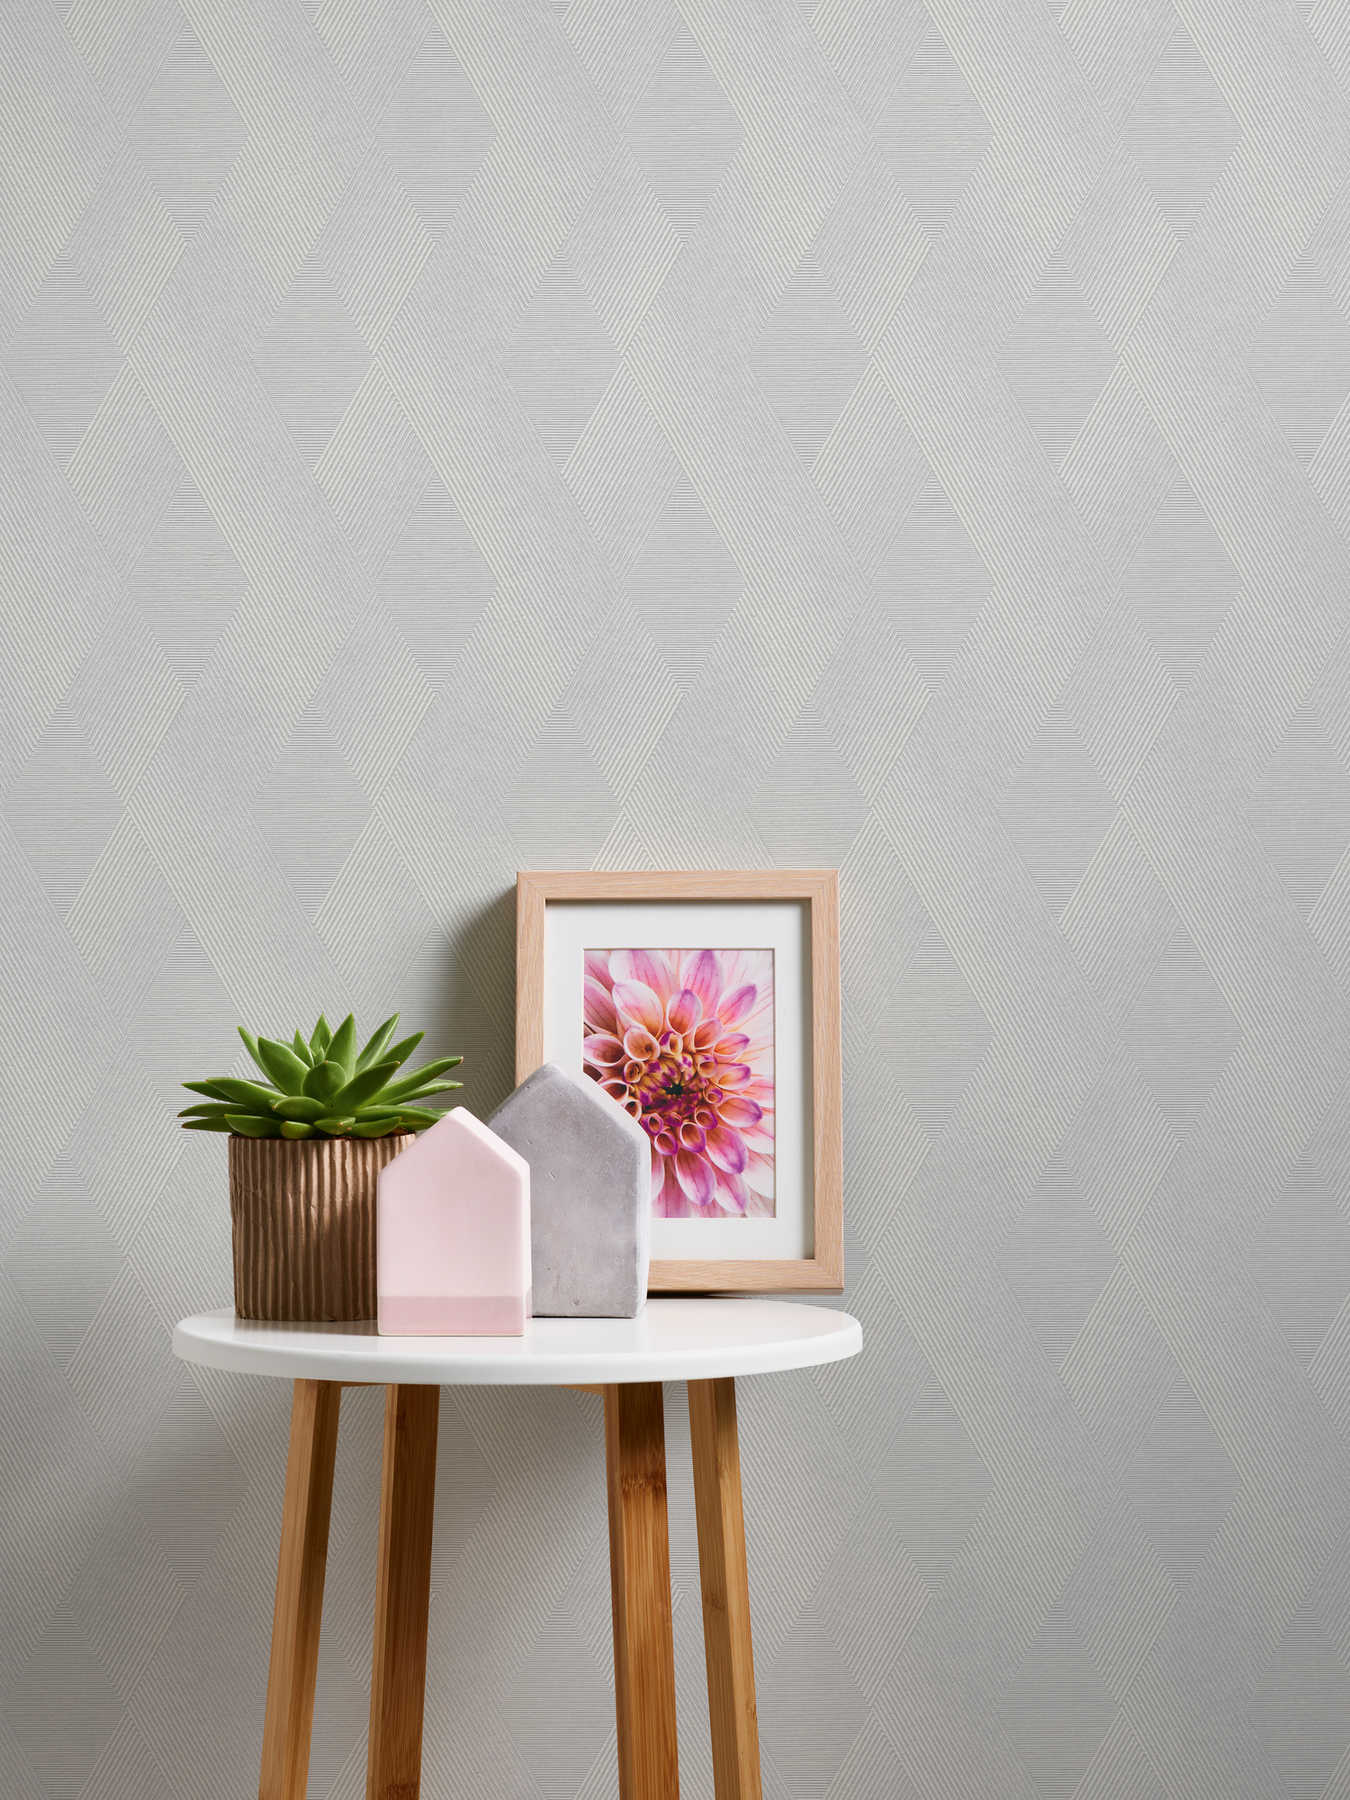             Paintable effect wallpaper with geometric pattern
        